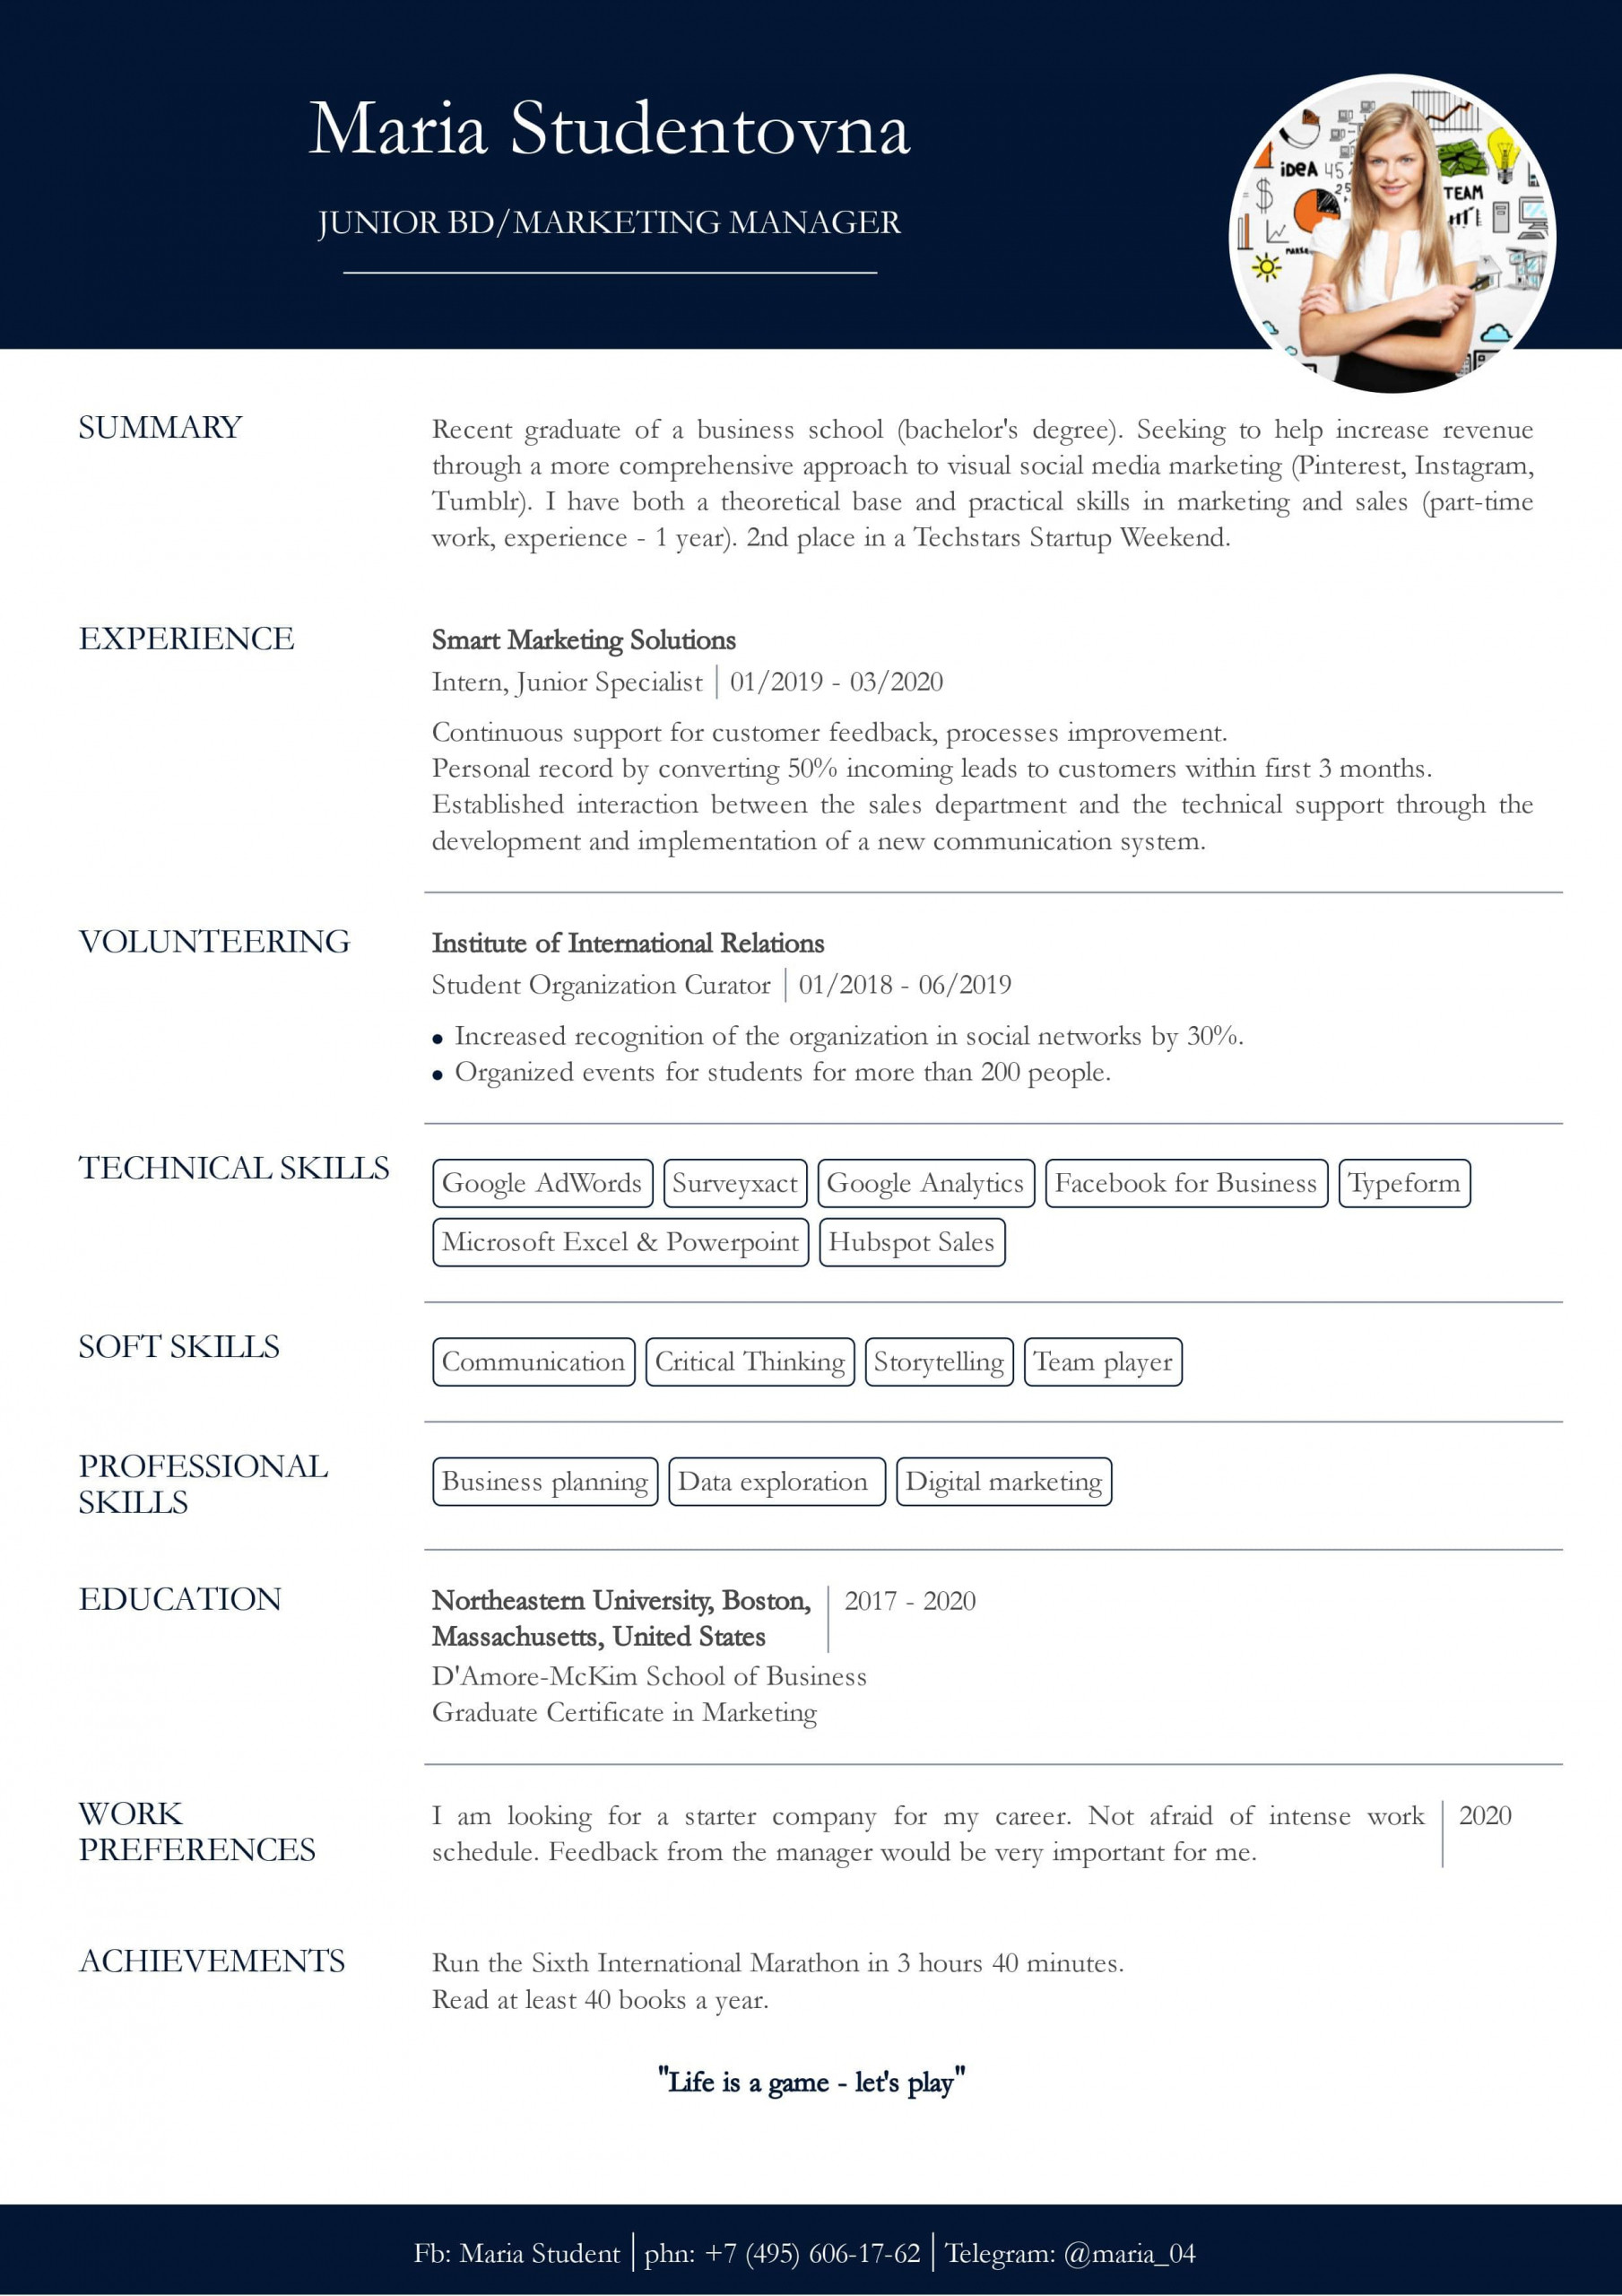 Applying for A Job with No Related Experience Sample Resume Resume with No Work Experience. Sample for Students. – Cv2you Blog